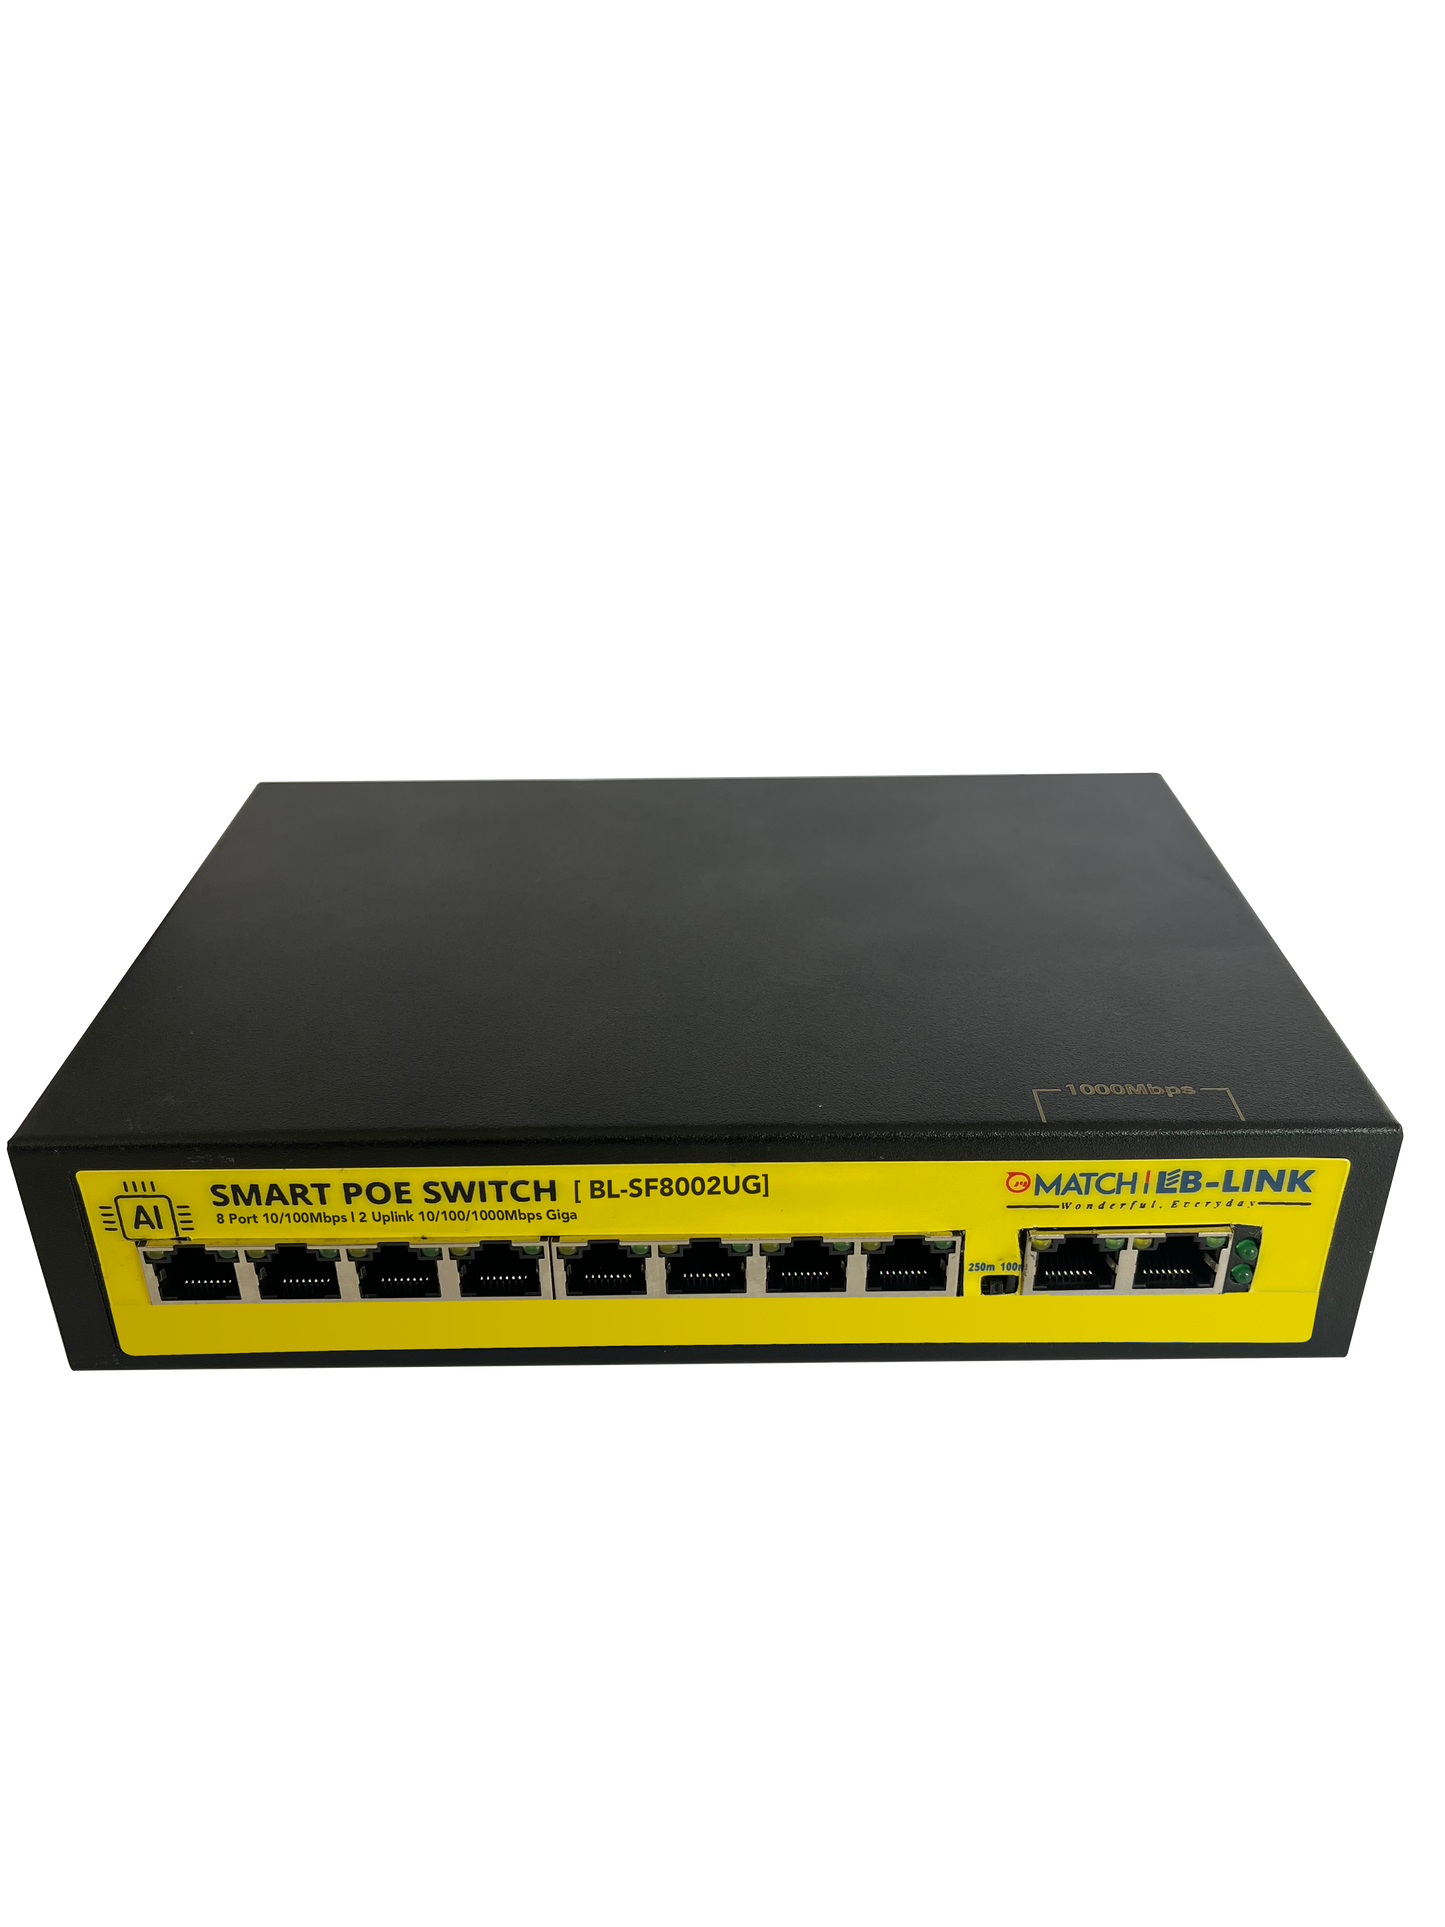 8 Port POE with 2 Giga Up-Links